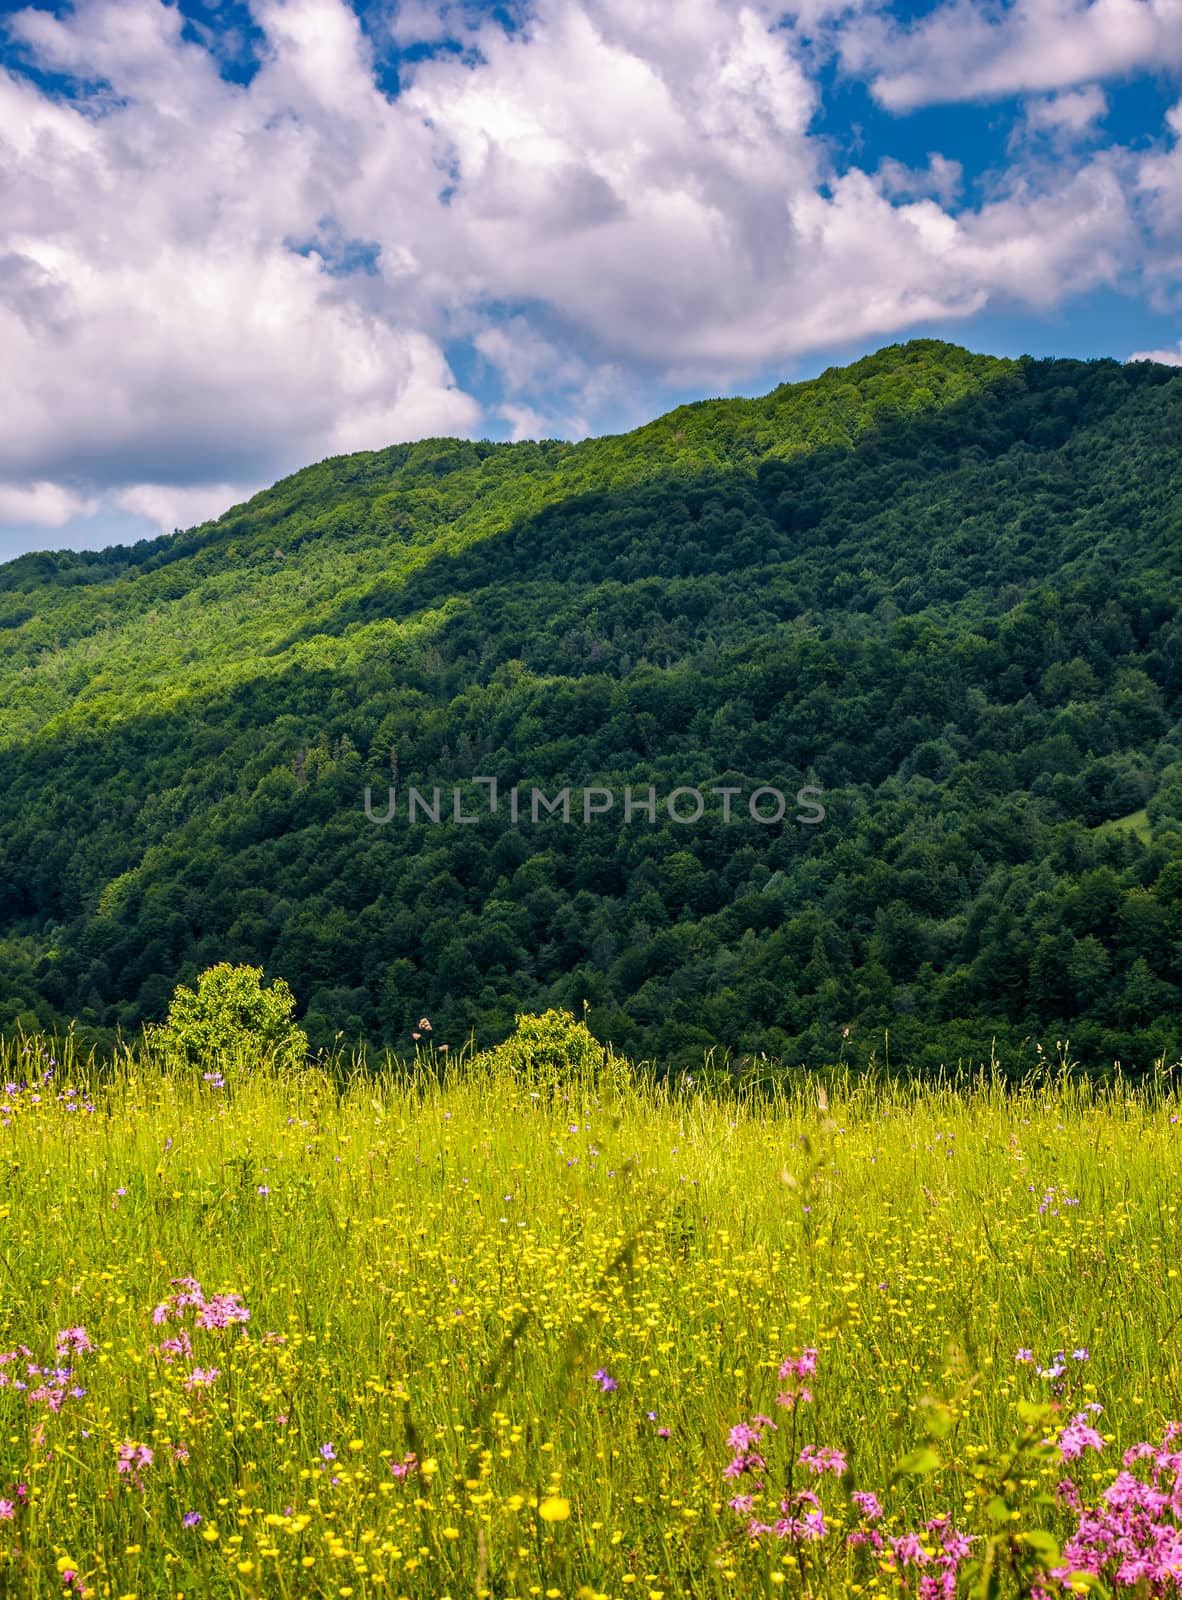 grassy pasture with wild flowers in mountains. beautiful summer scenery on a fine weather day